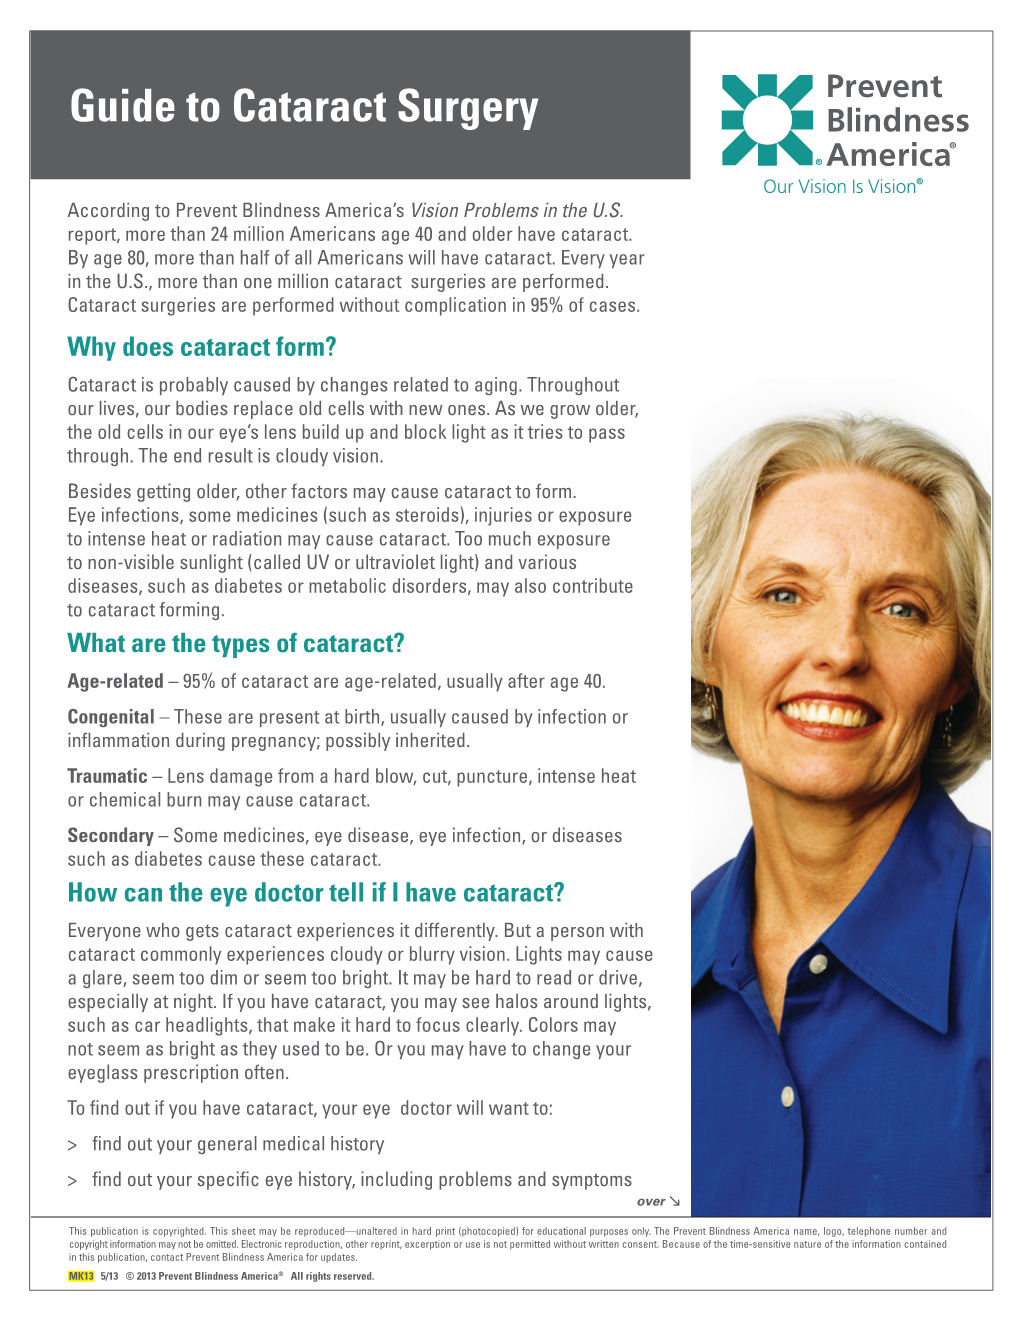 Guide to Cataract Surgery